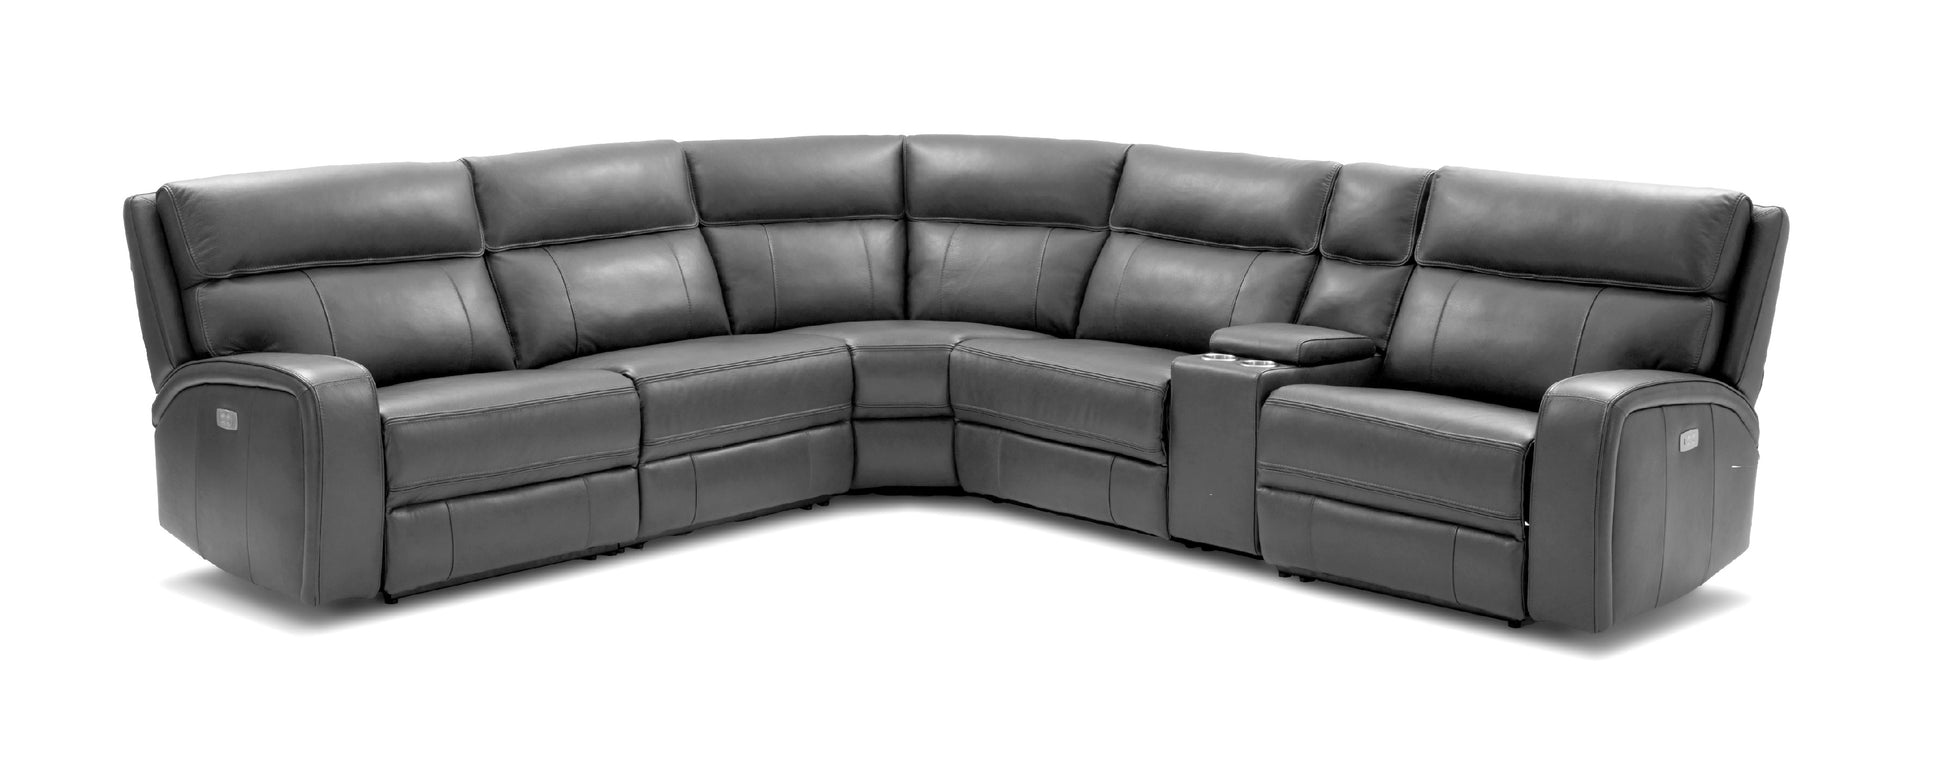 Cozy Motion Sectional Sofa Grey by JM